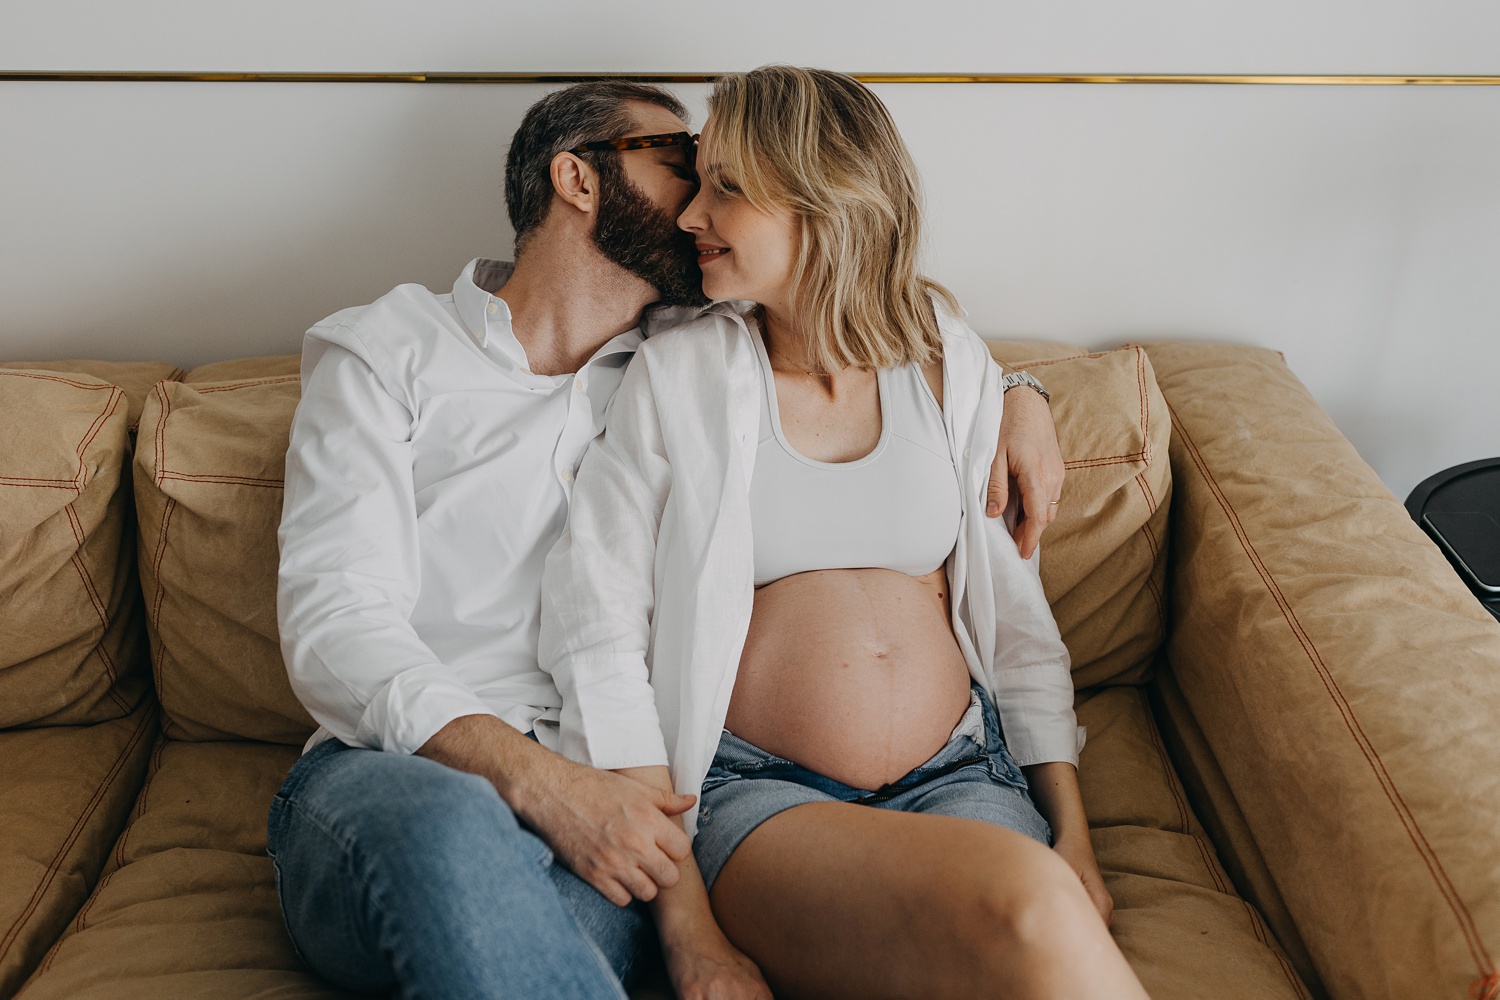 maternity photo session: Expectant couple sharing a tender moment at home